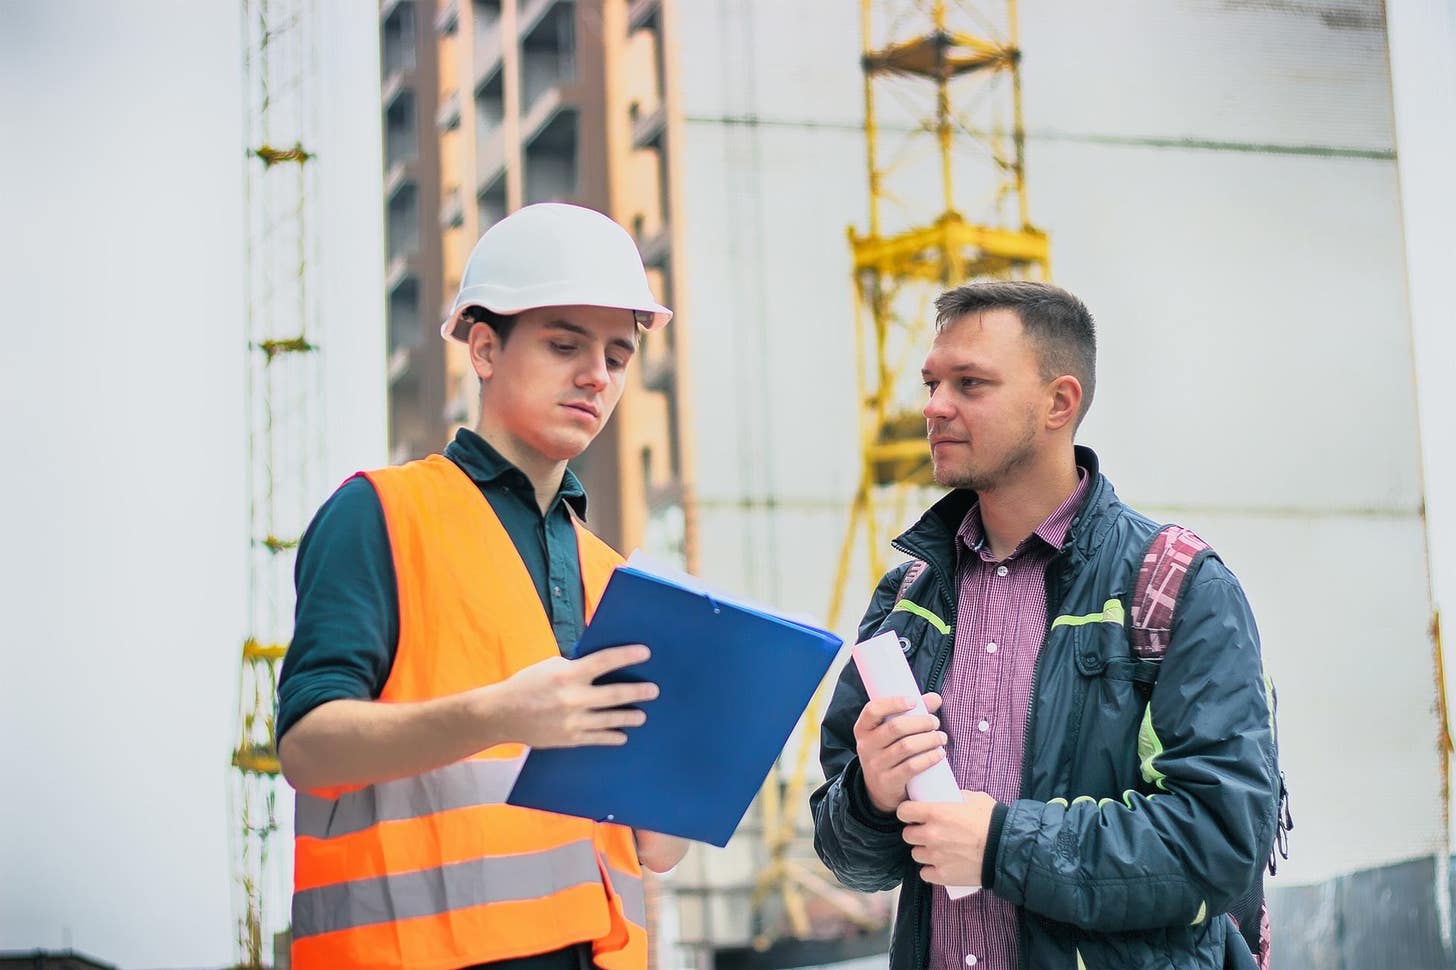 How to Become a Health and Safety Advisor